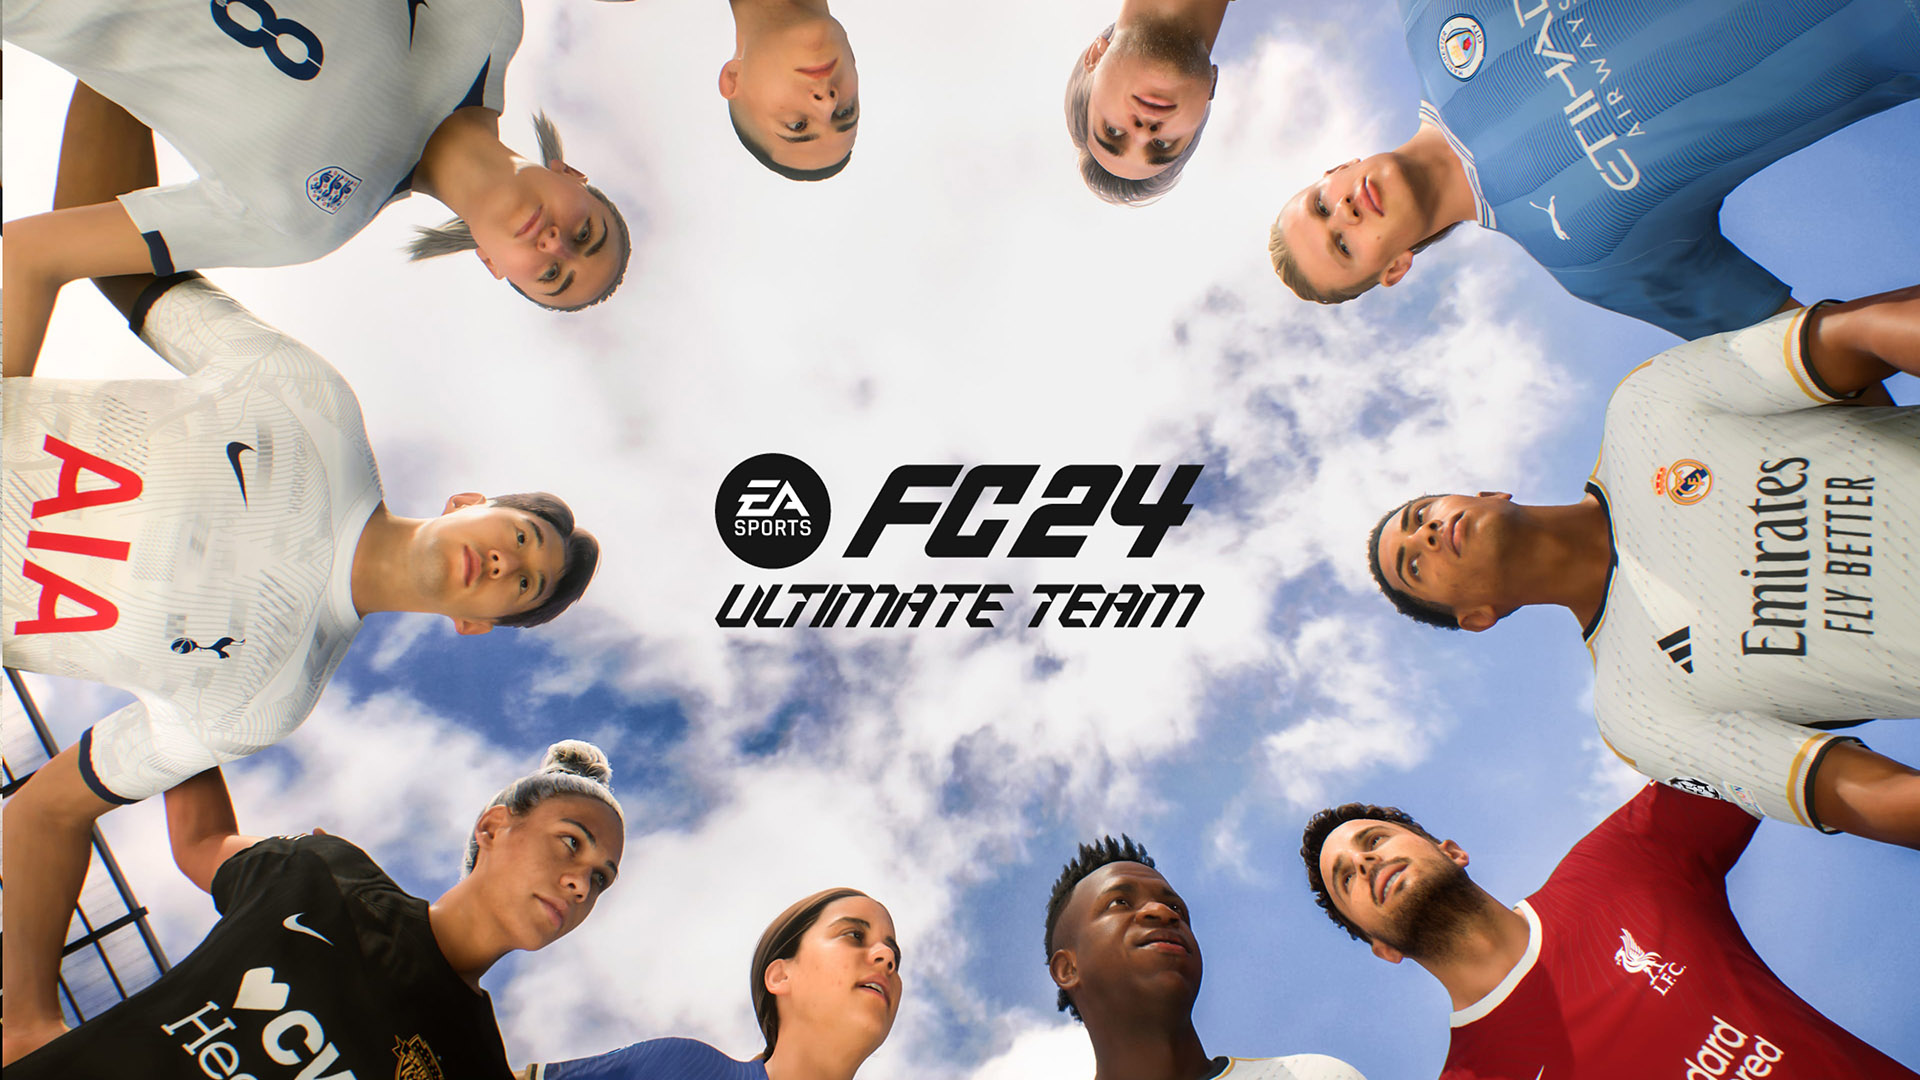 EA FC 24 Prime Gaming Pack: How to link your EA account